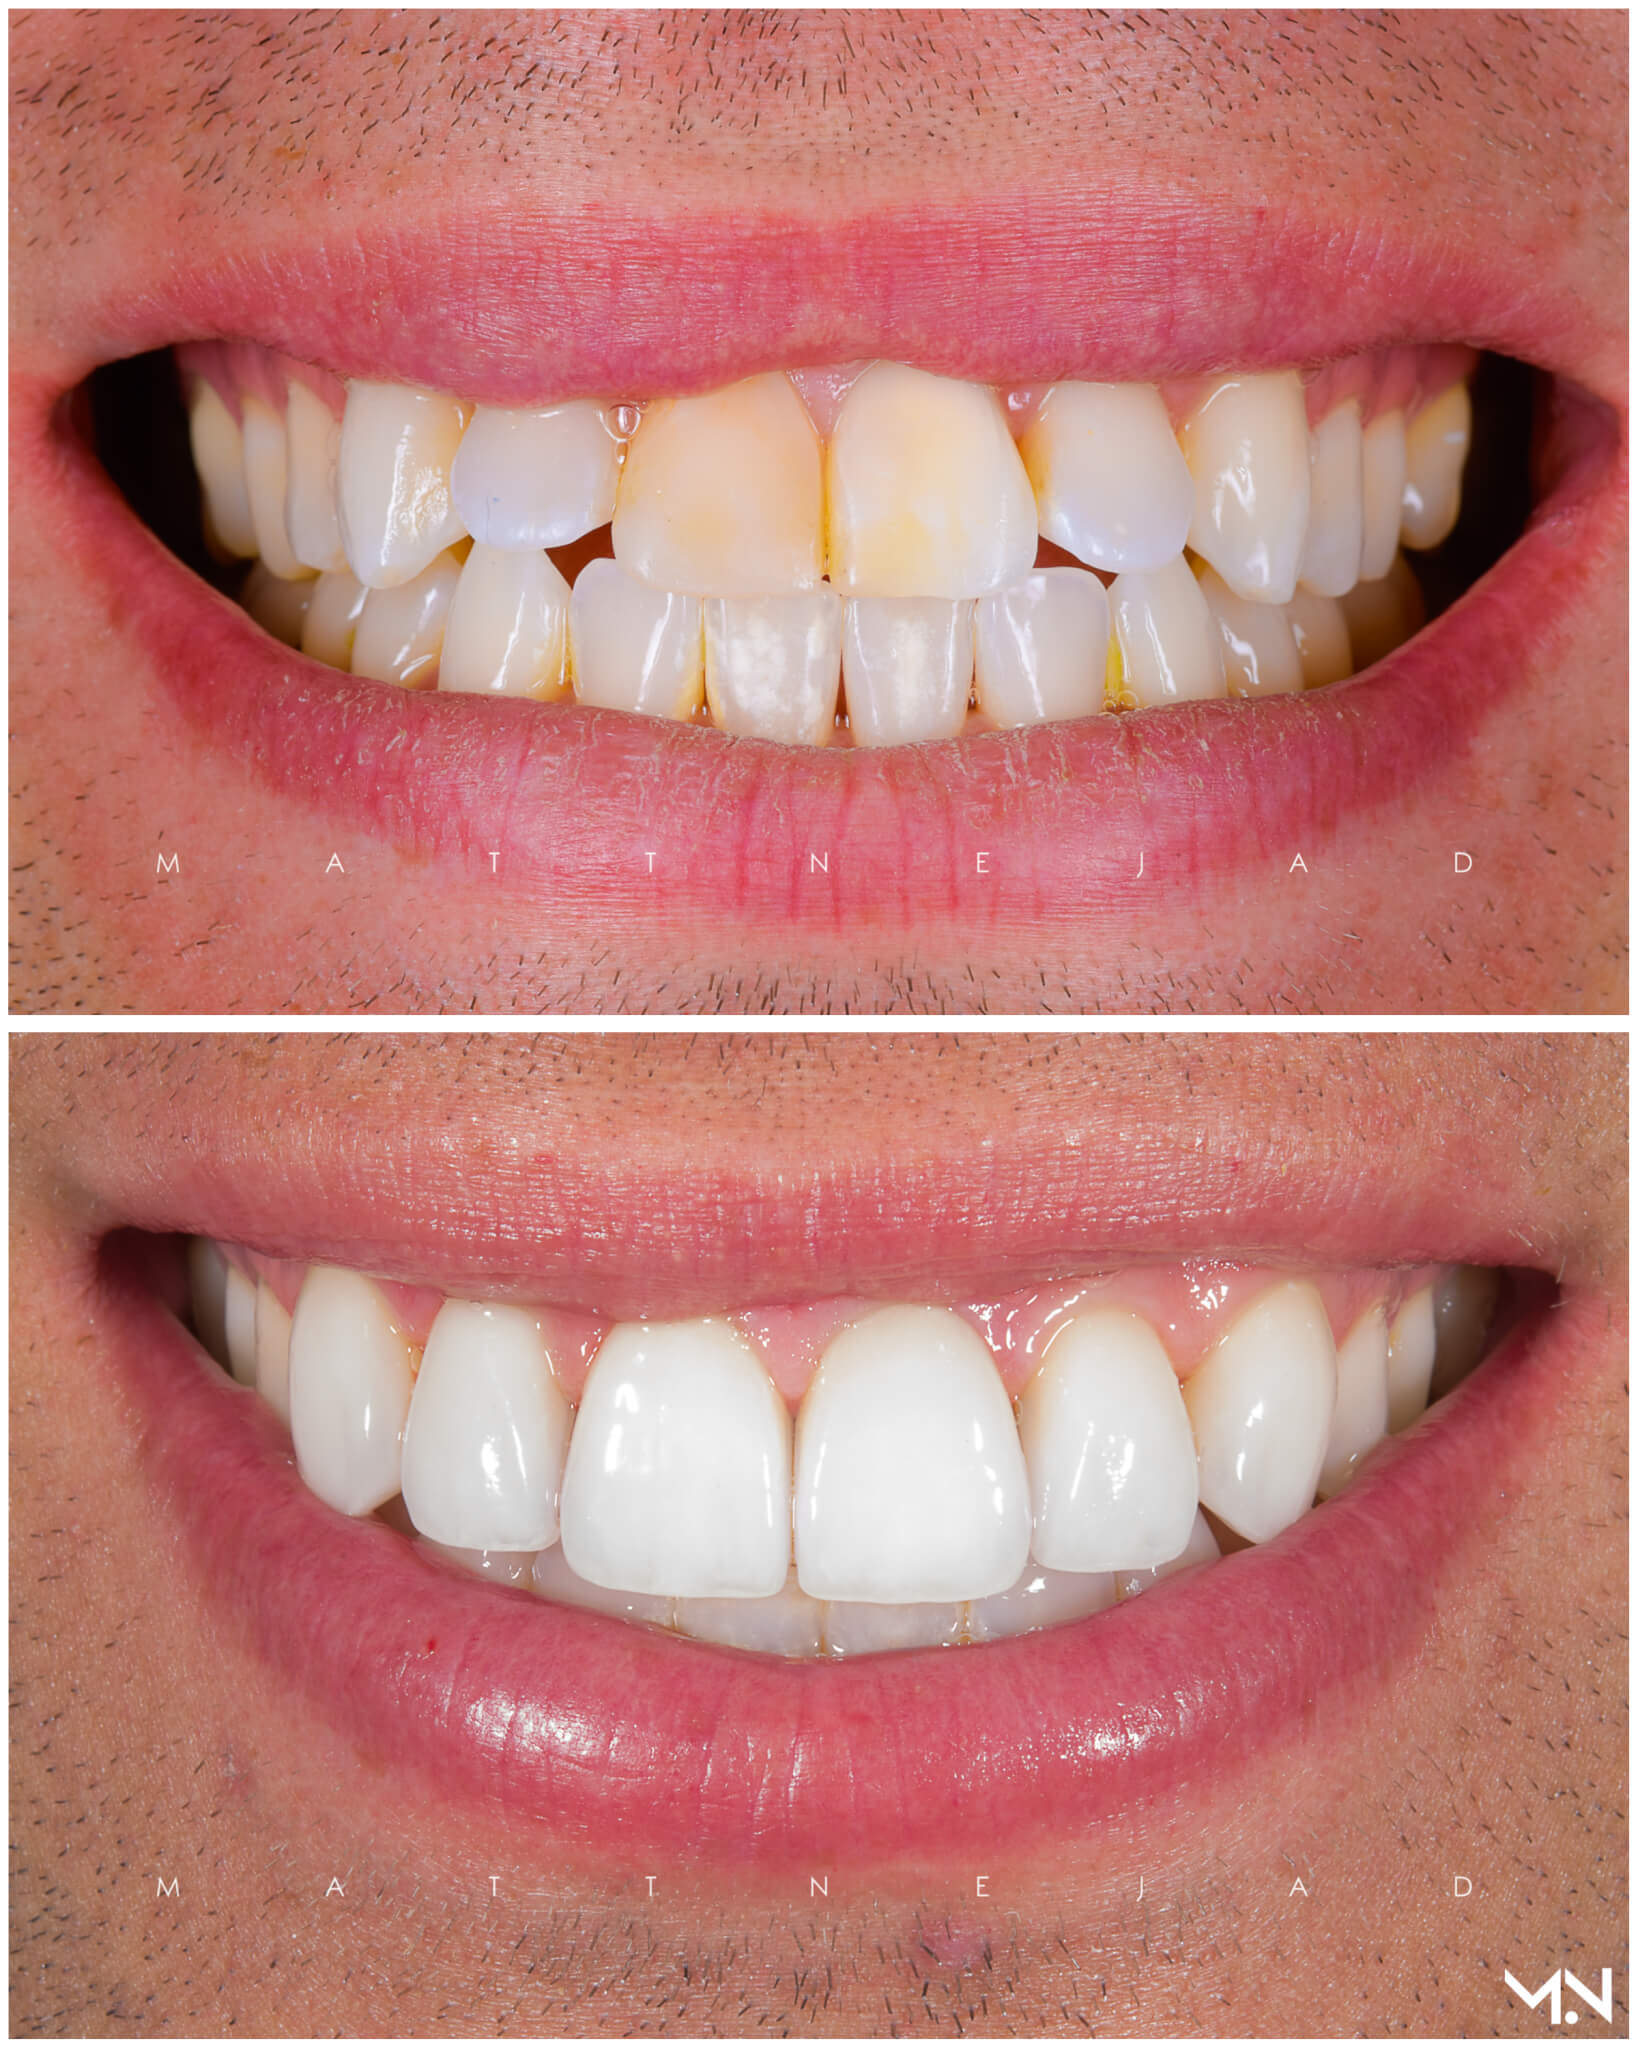 Cosmetic Smile Makeover with 6 Porcelain Veneers to correct flared teeth- Before and after